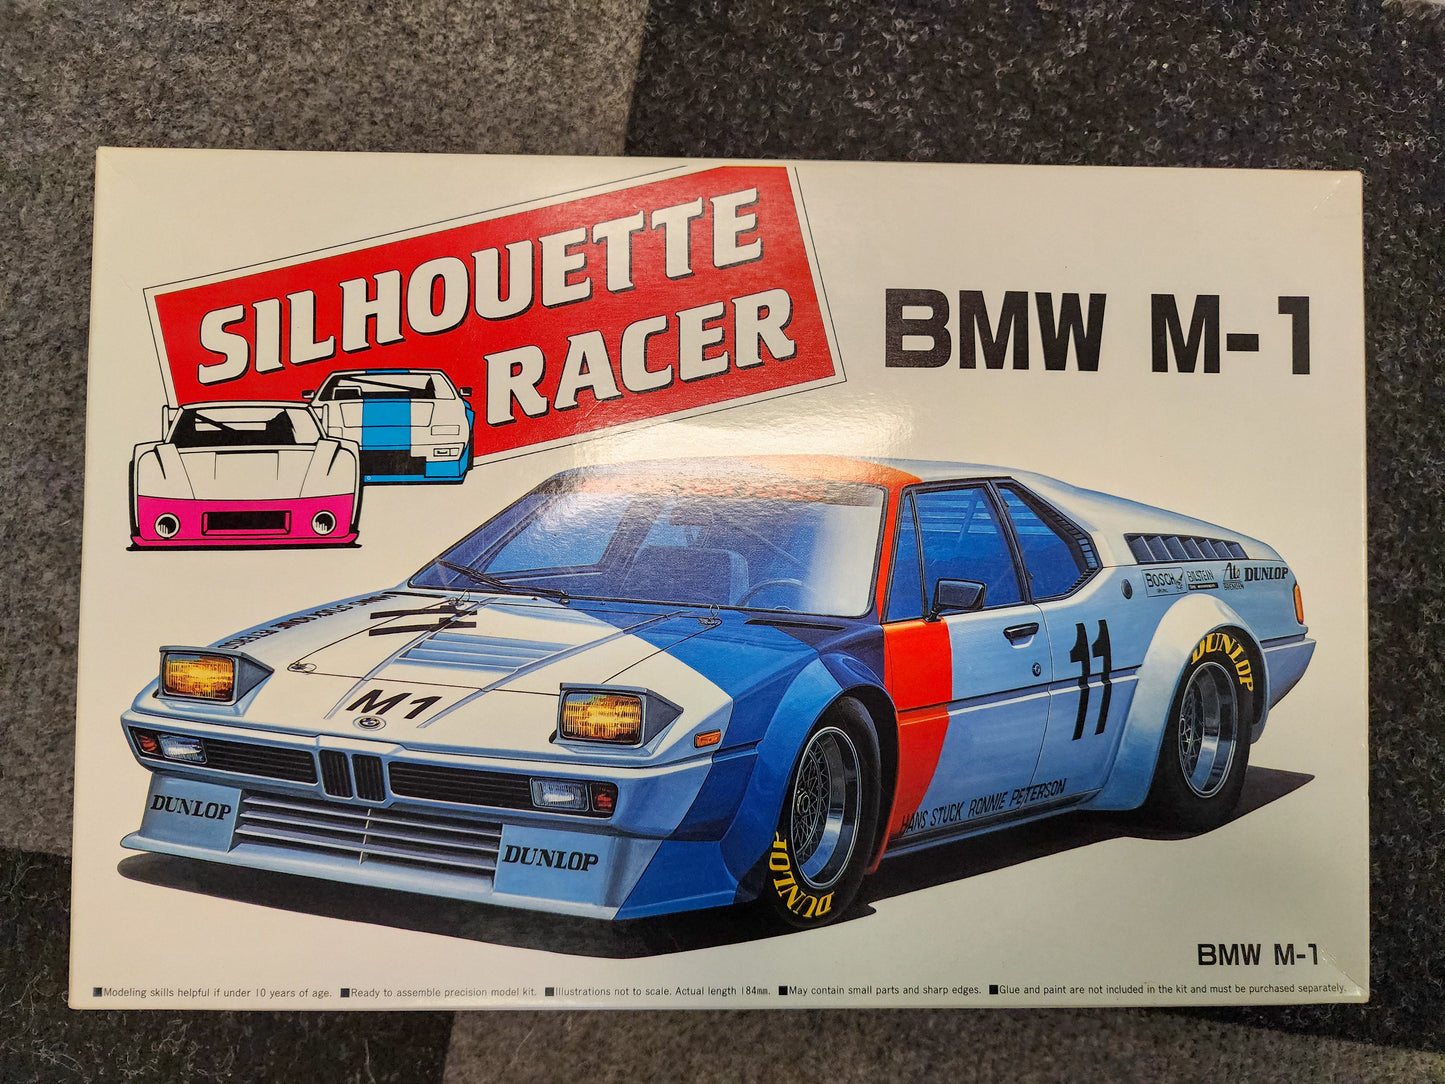 Bmw M1 silhouette racer 1/24 scale model